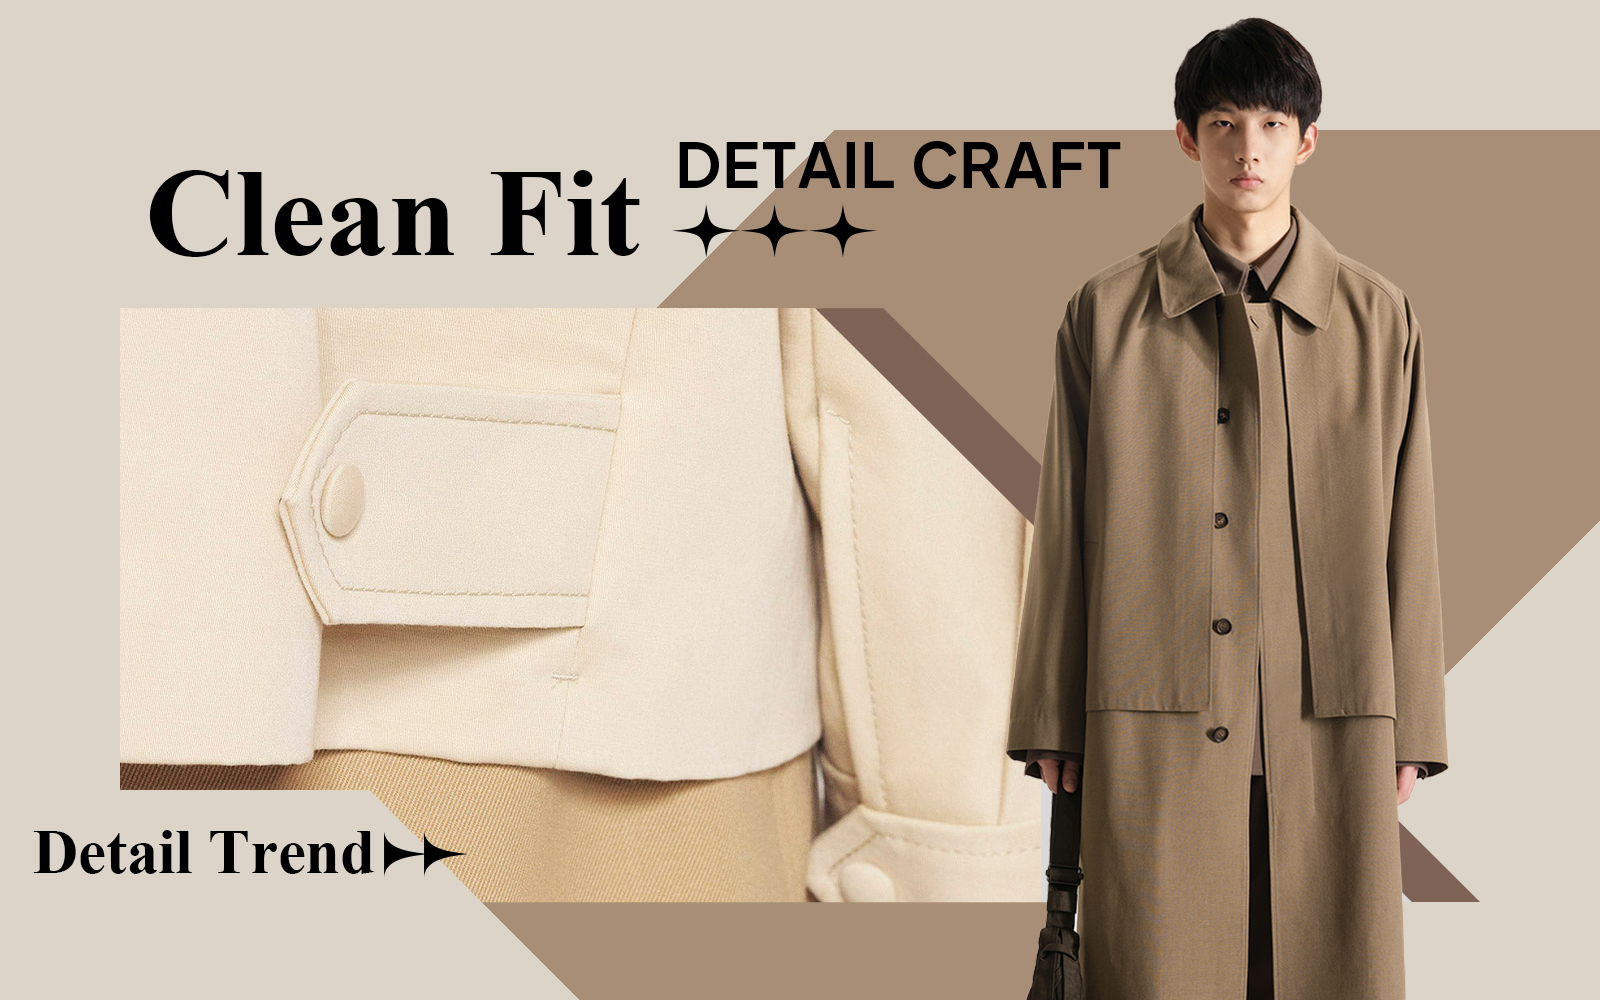 Clean Fit -- The Detail & Craft Trend for Menswear